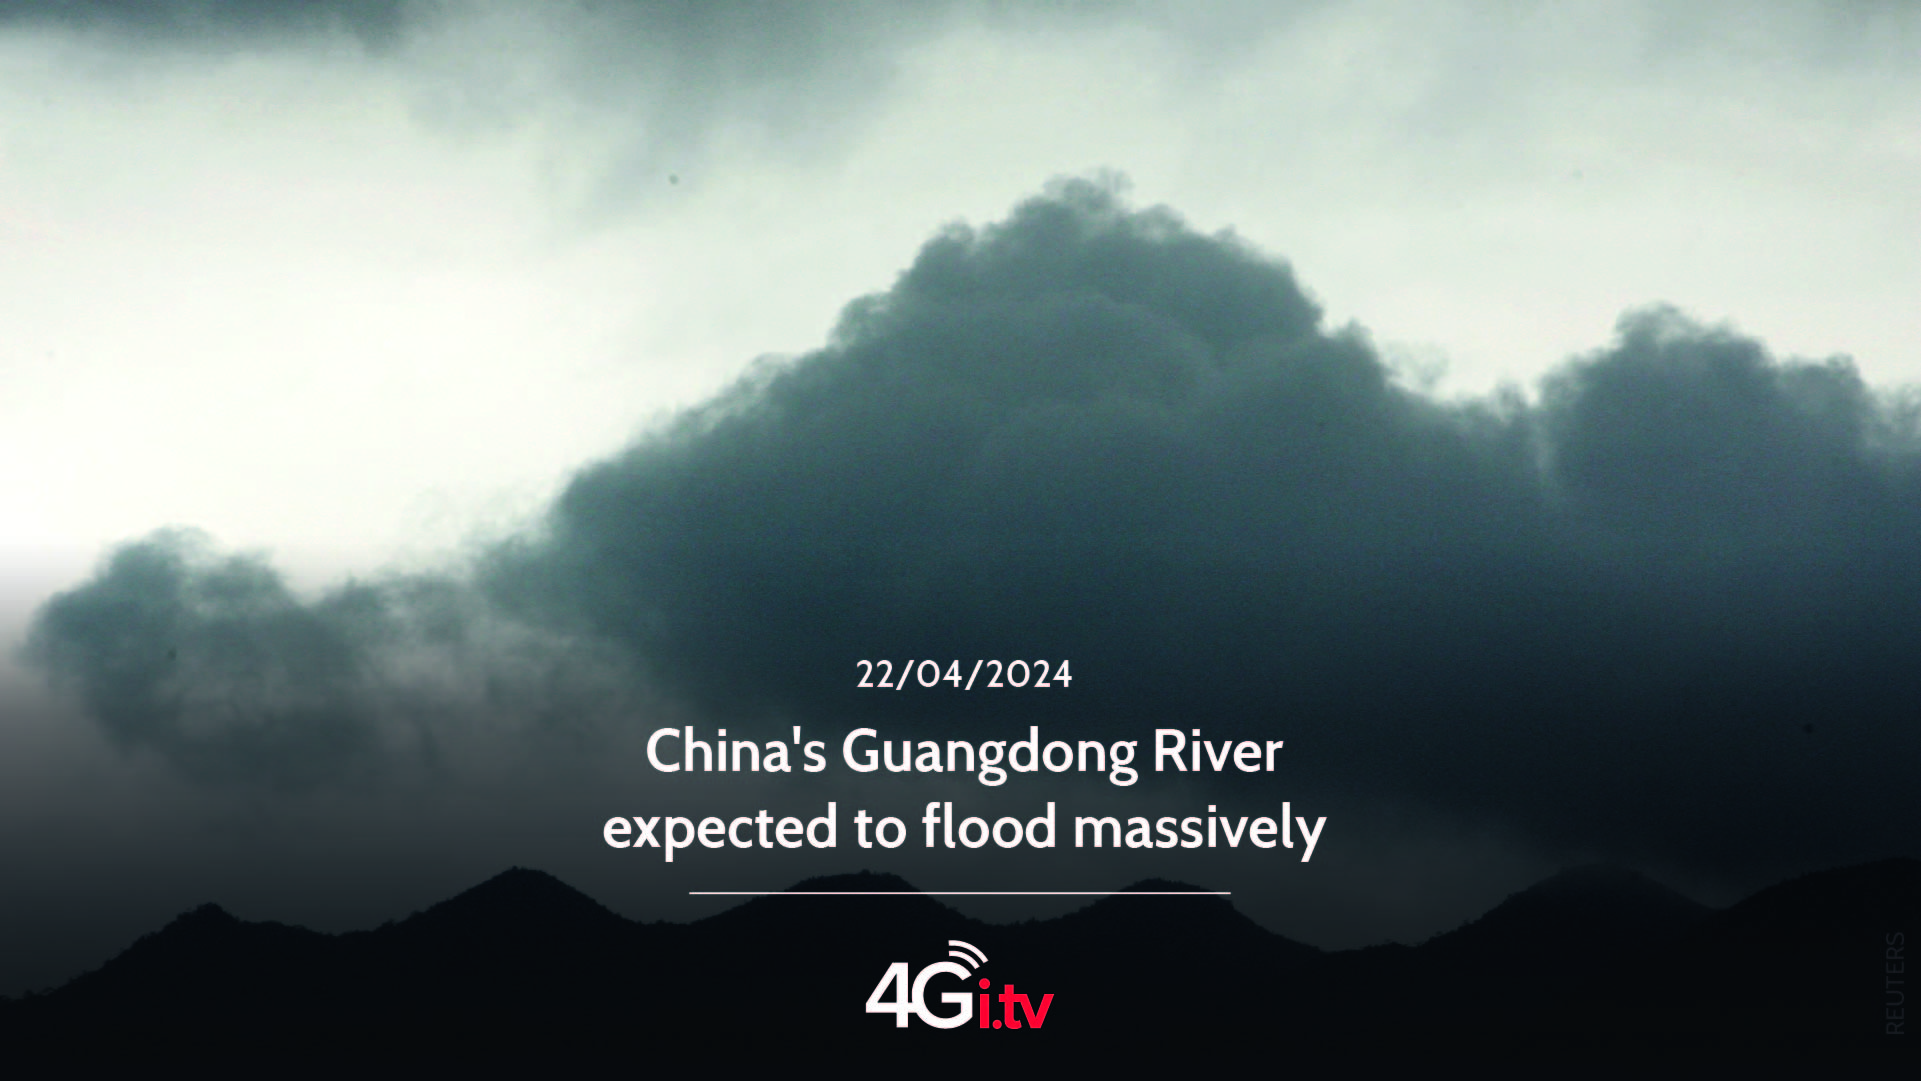 Lesen Sie mehr über den Artikel China’s Guangdong River expected to flood massively